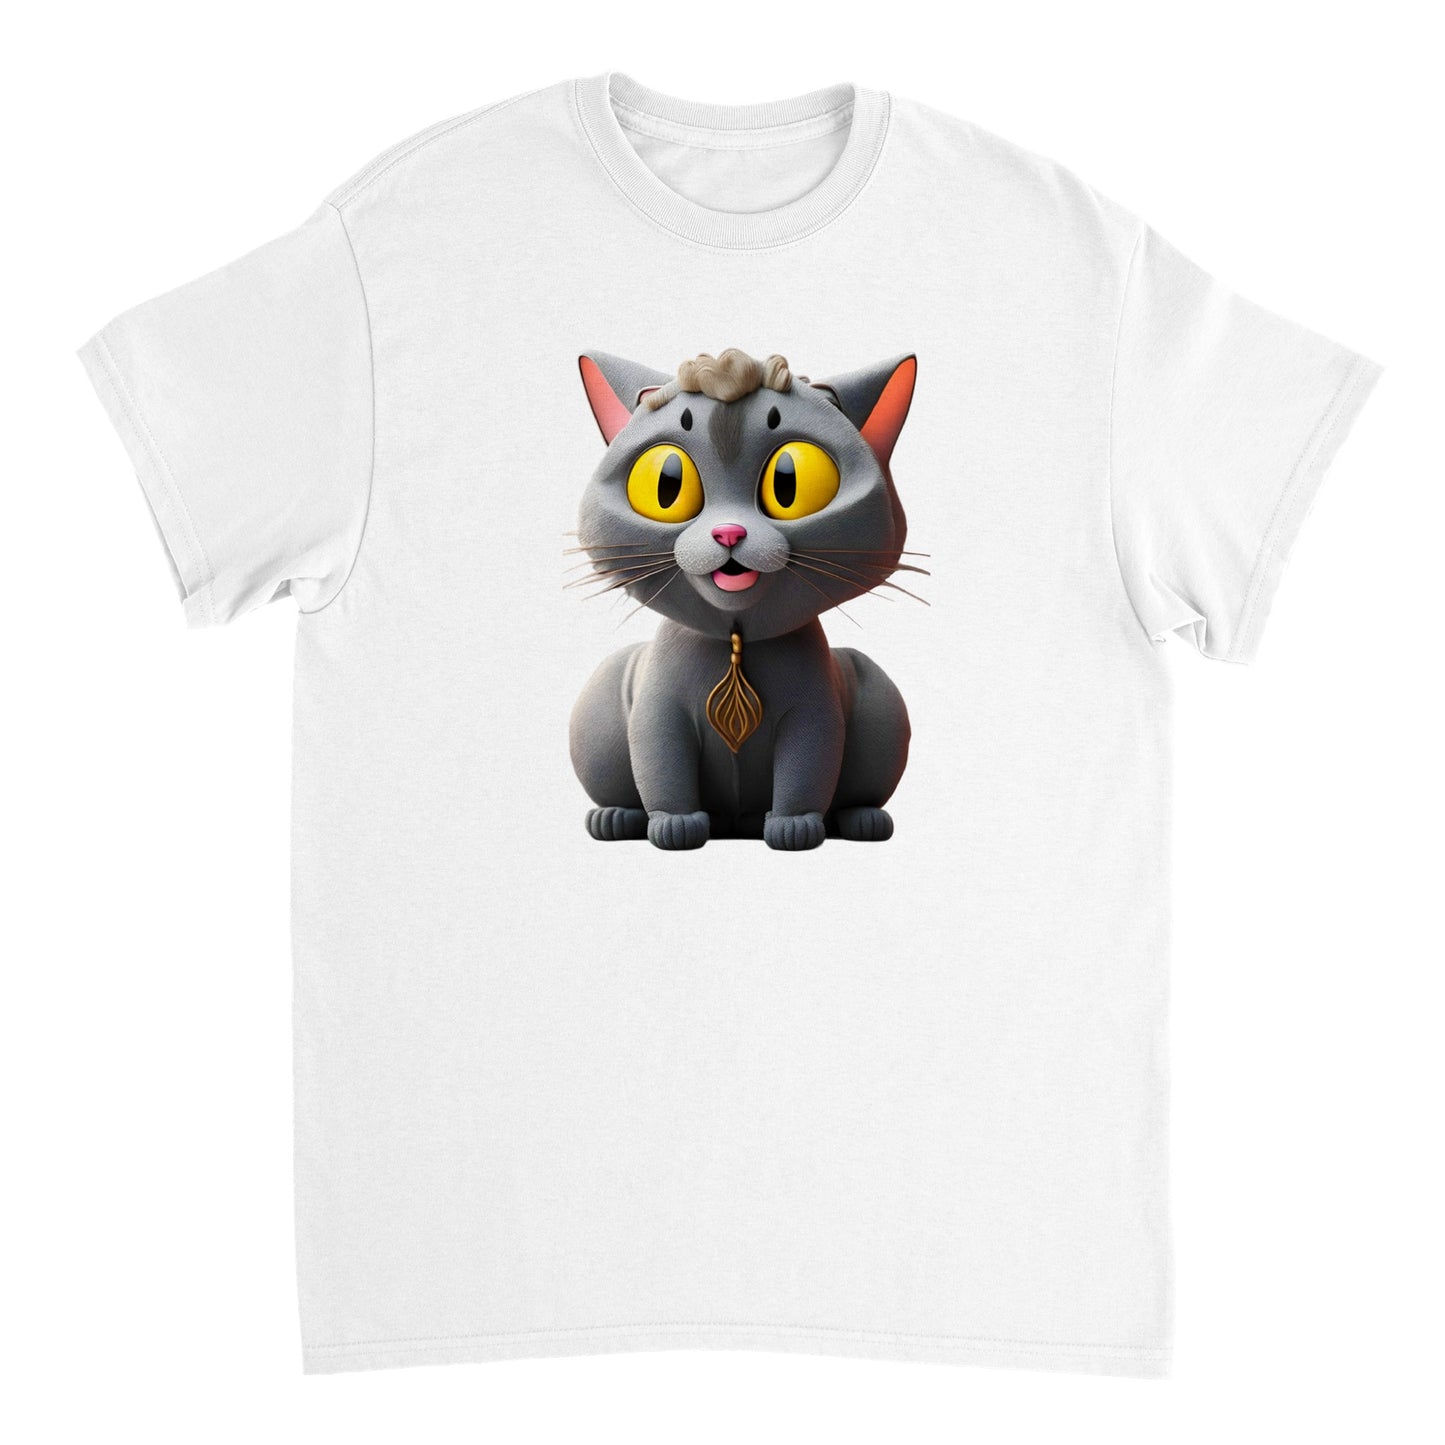 Adorable, Cool, Cute Cats and Kittens Toy - Heavyweight Unisex Crewneck T-shirt 51